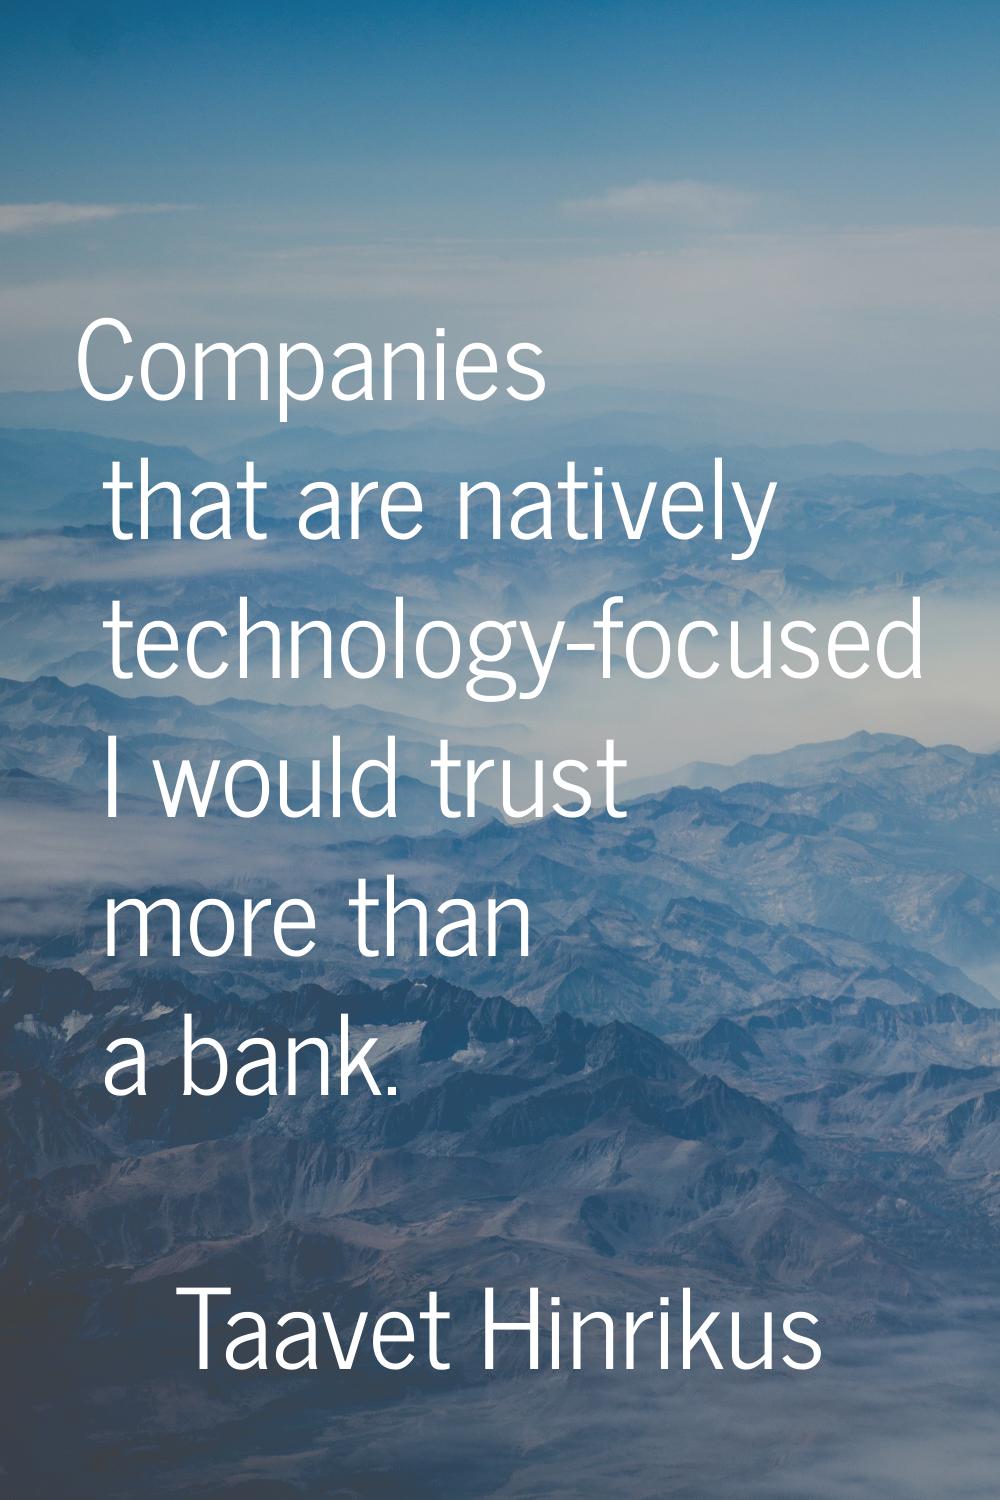 Companies that are natively technology-focused I would trust more than a bank.